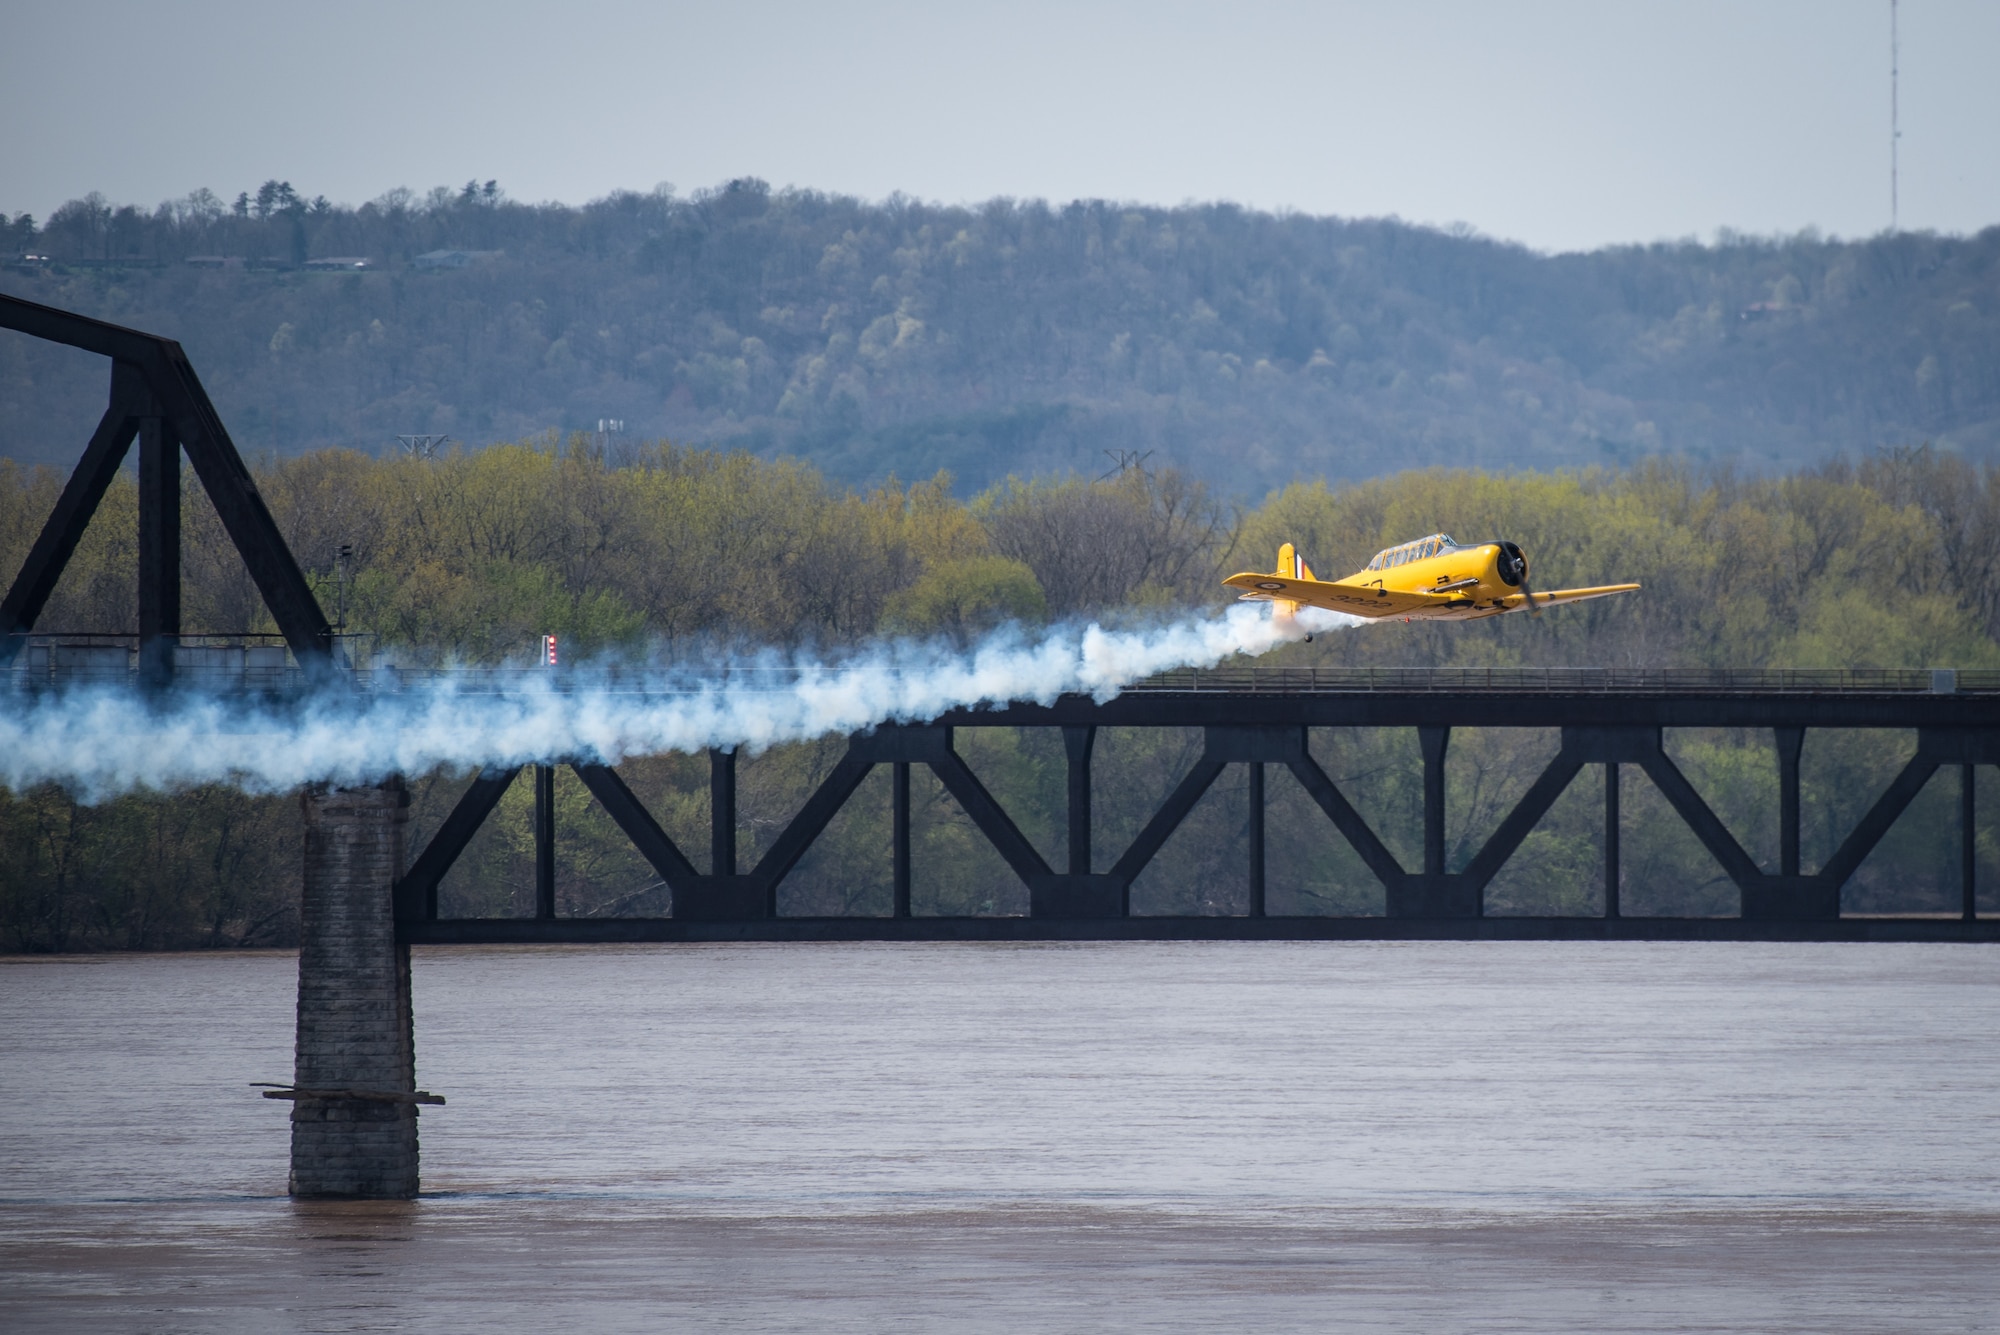 The Canadian Harvard Aerobatic Team performs an aerial demonstration over the Ohio River April 21, 2018, during the Thunder Over Louisville air show in Louisville, Ky. This year’s event drew a crowd of more than 500,000 spectators. (U.S. Air National Guard photo by Lt. Col. Dale Greer)